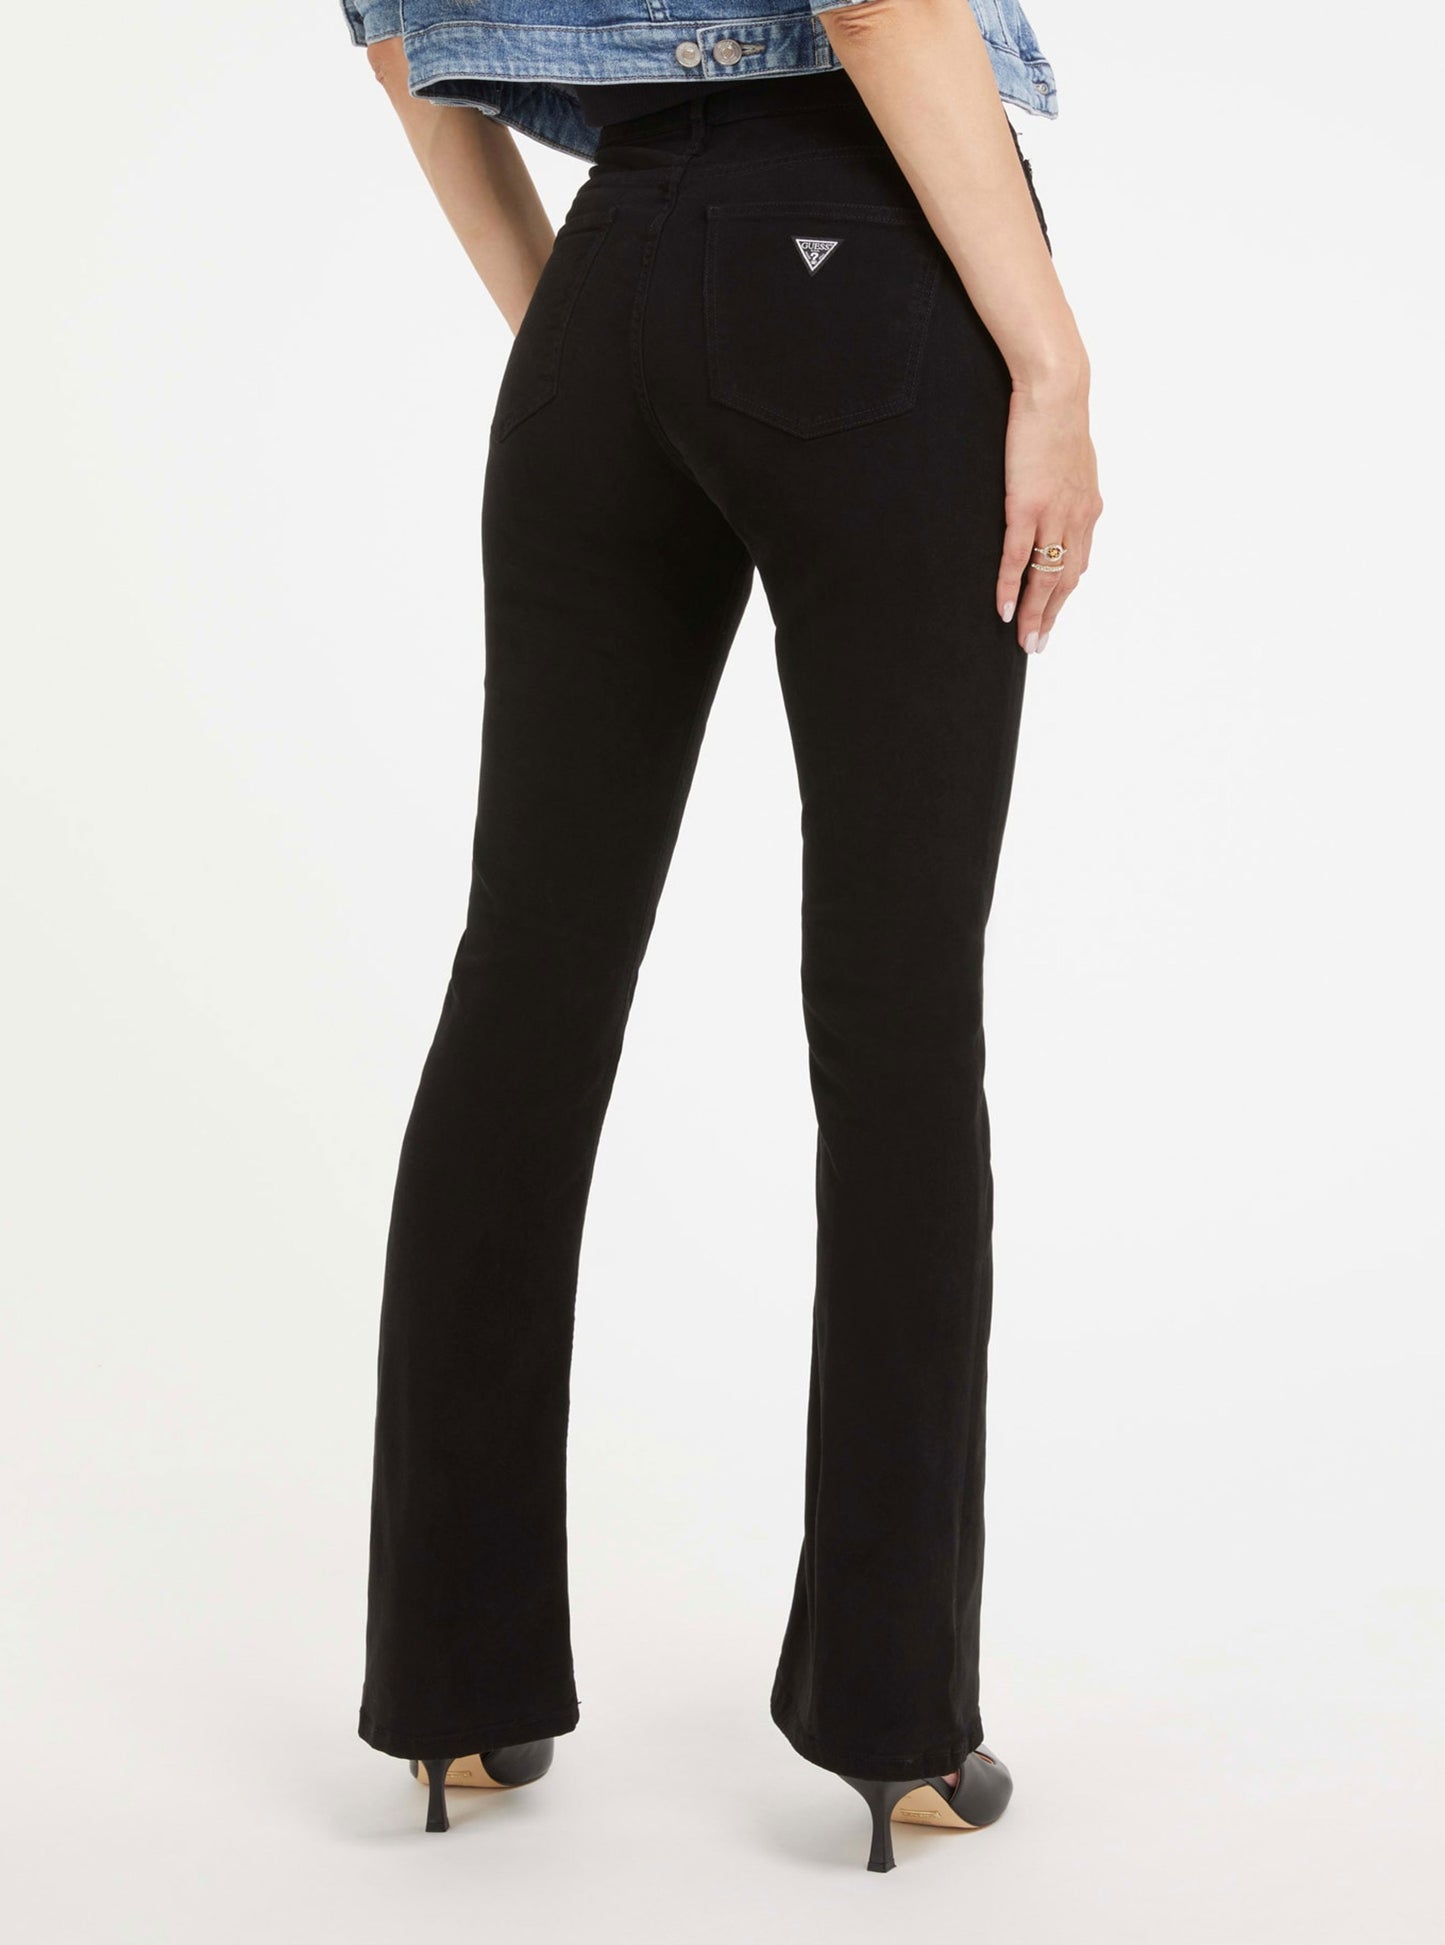 Eco Black Sexy Flare Velvet Pants | GUESS Women's Apparel | back view